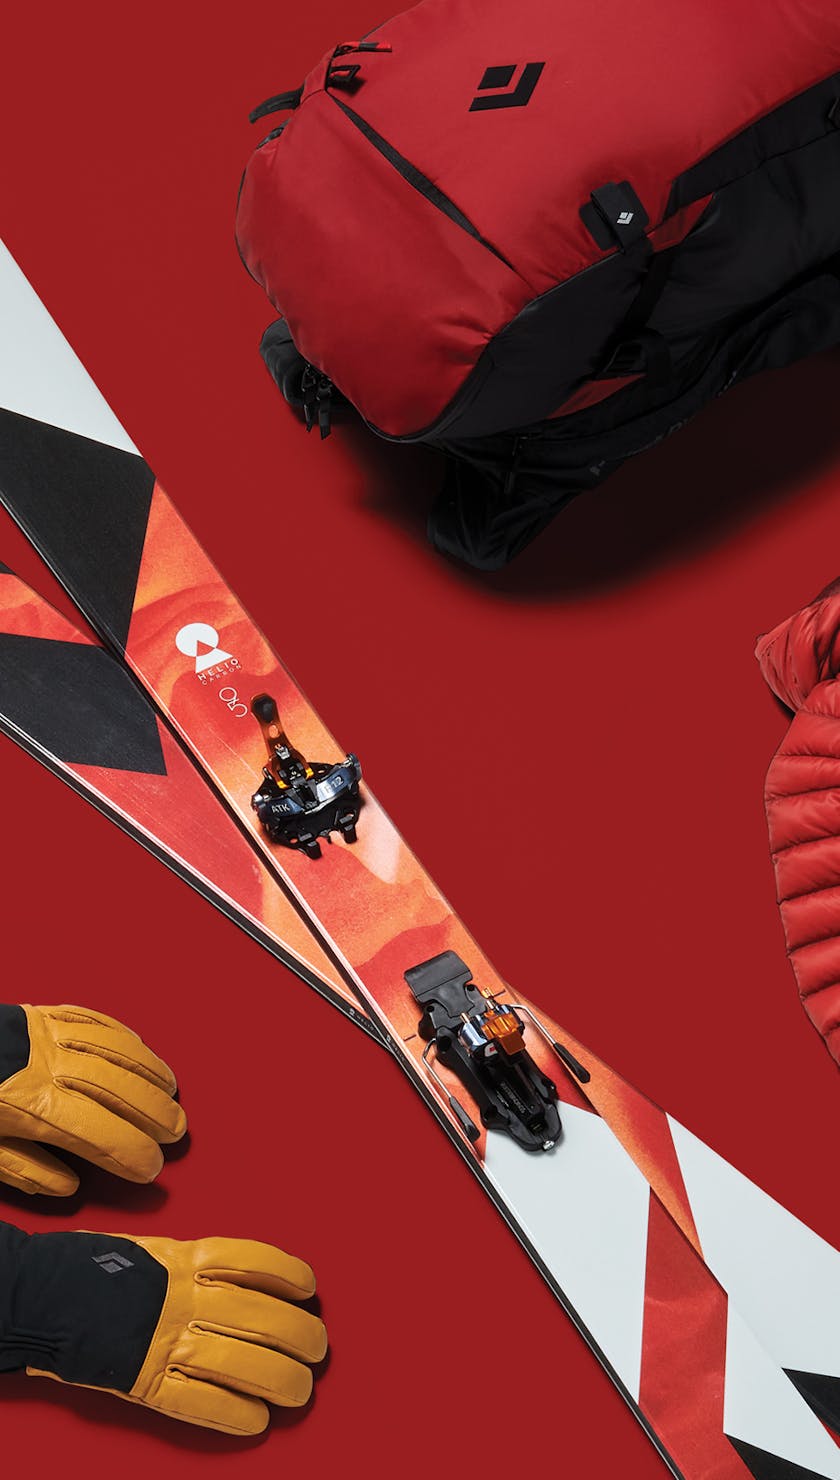 A lay down image of a Black Diamond ski kit with a red holiday theme.  